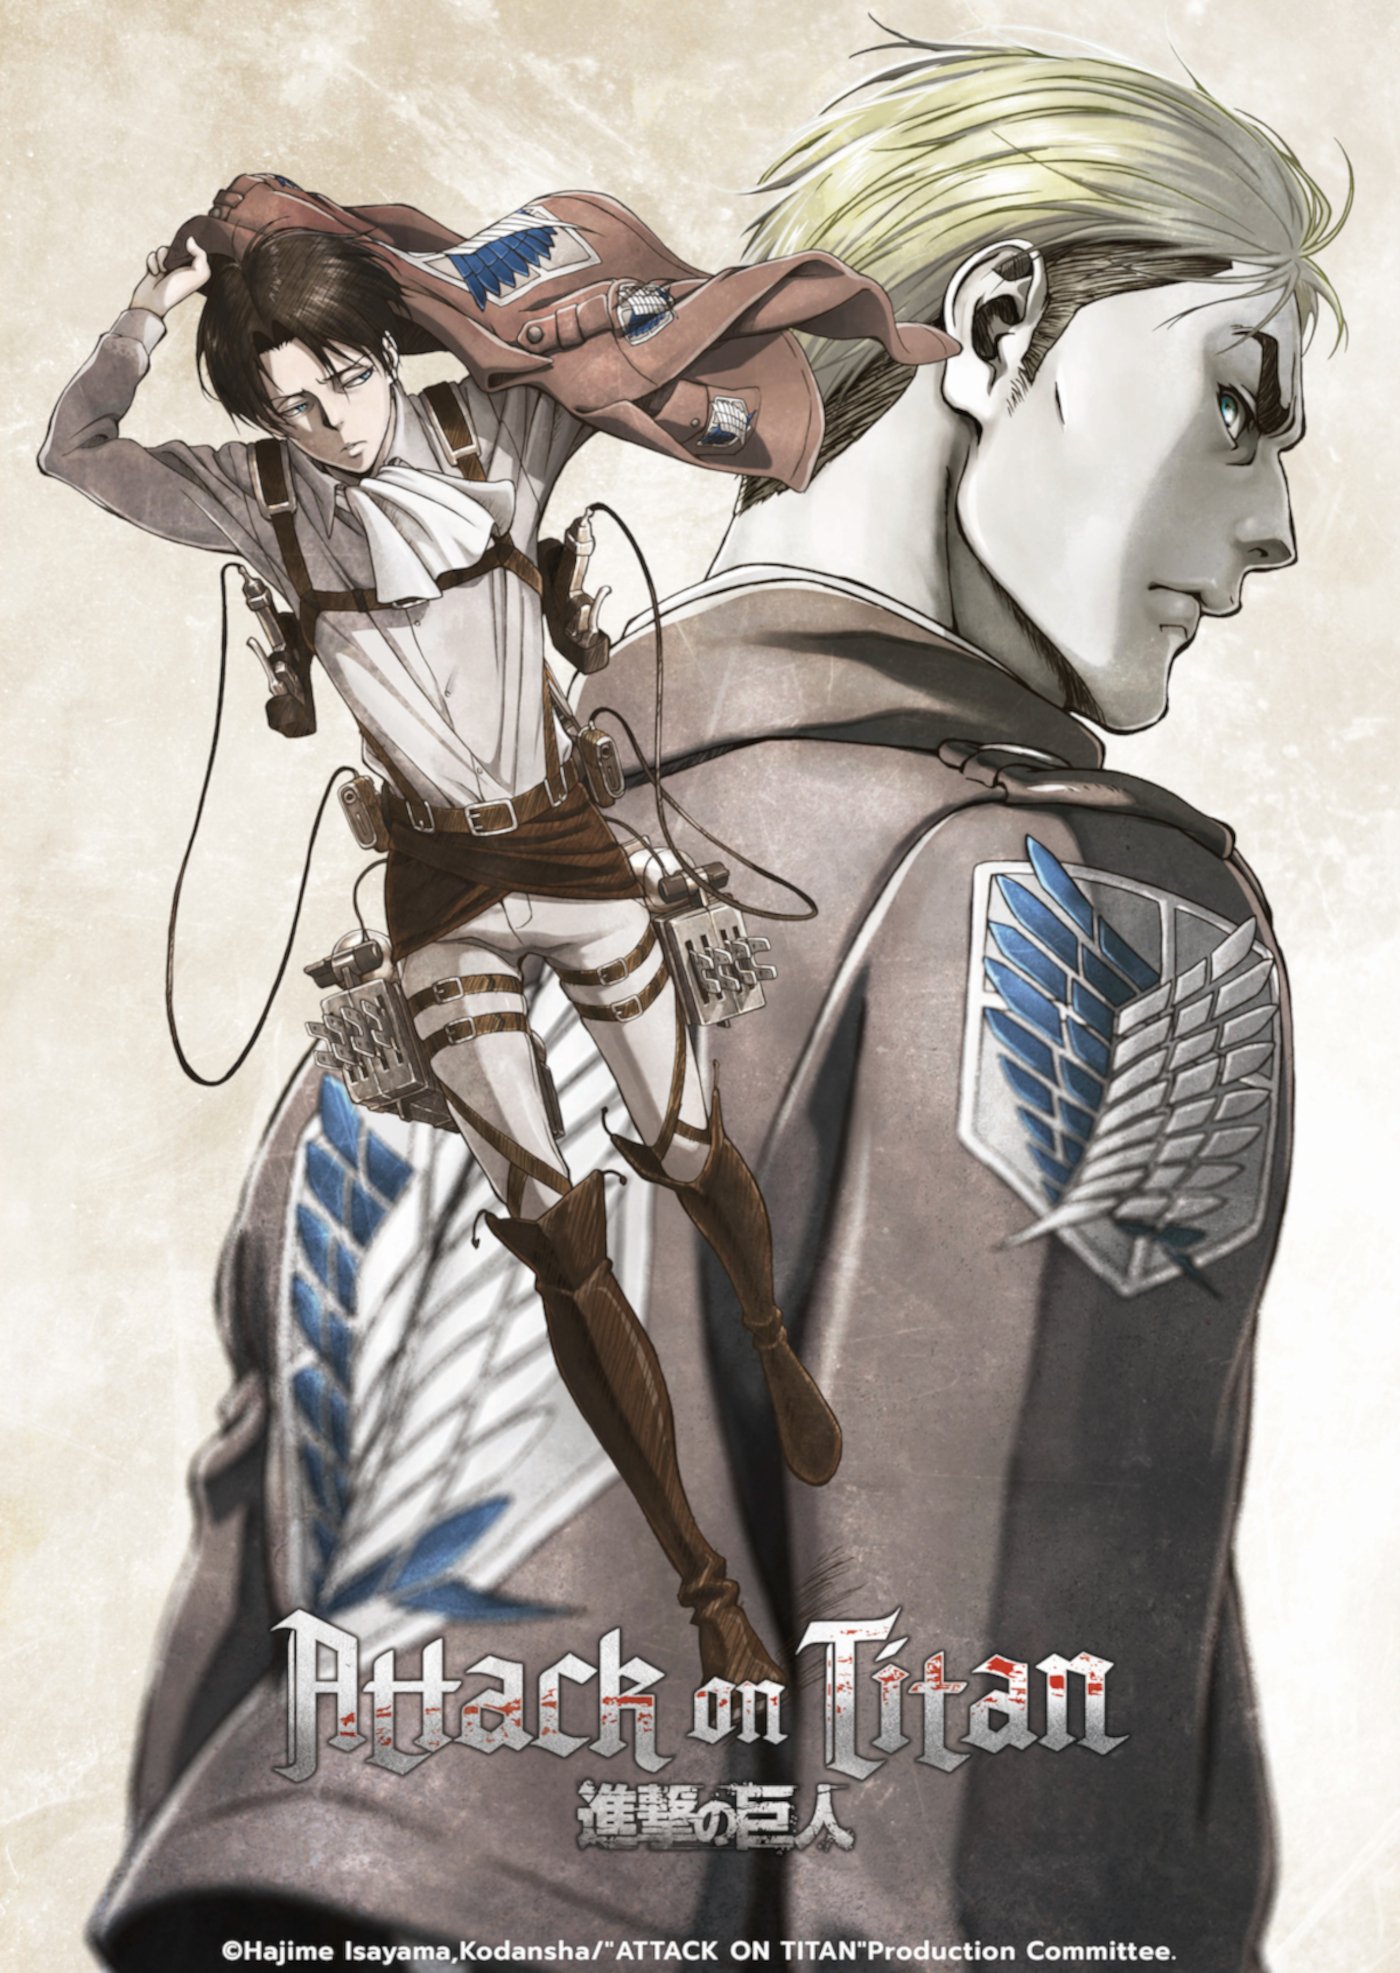 Key art for 'Attack on Titan's 'No Regrets' OAD, featuring Levi Ackerman and Erwin Smith.